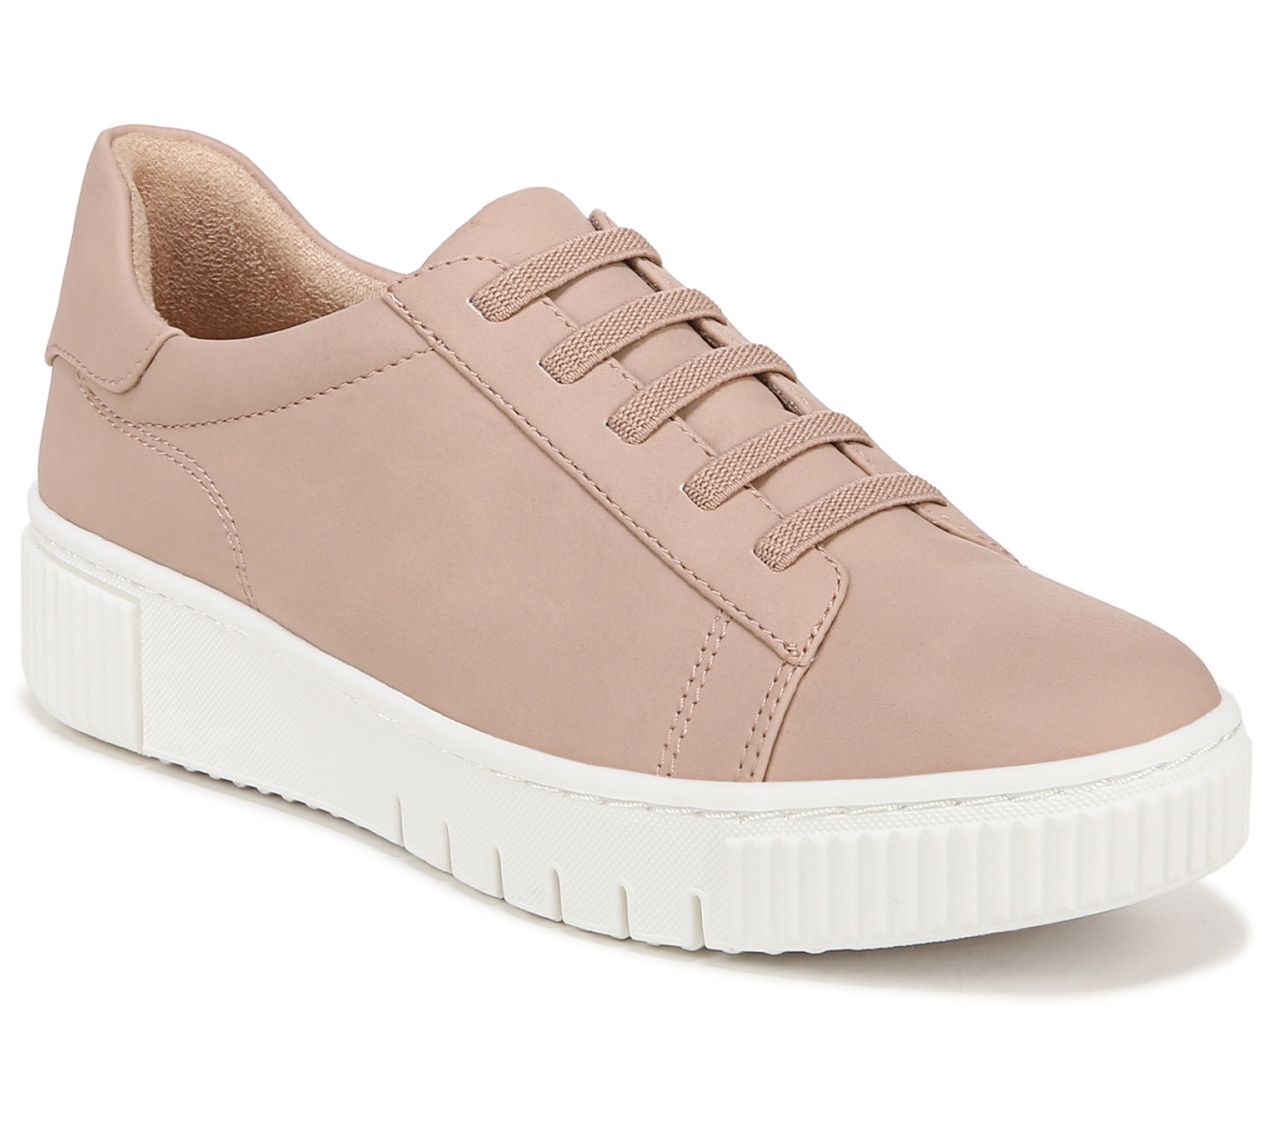 SOUL Naturalizer Fashion Sneakers- Tia Step-In 